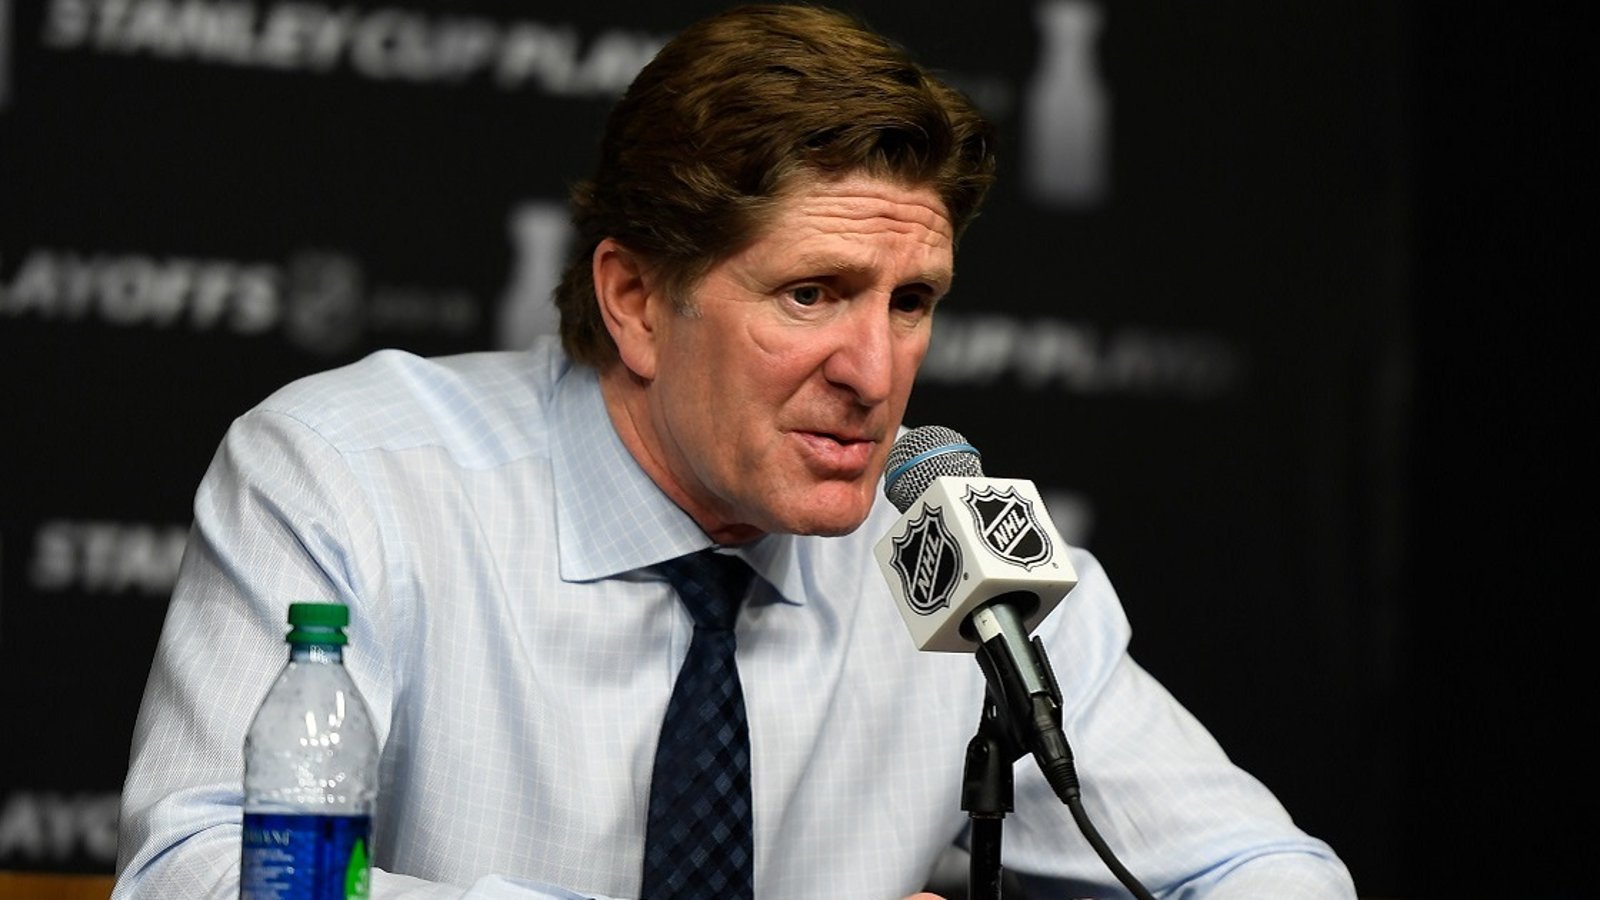 Former players, pundits and fans slam NBC after Mike Babcock's debut.